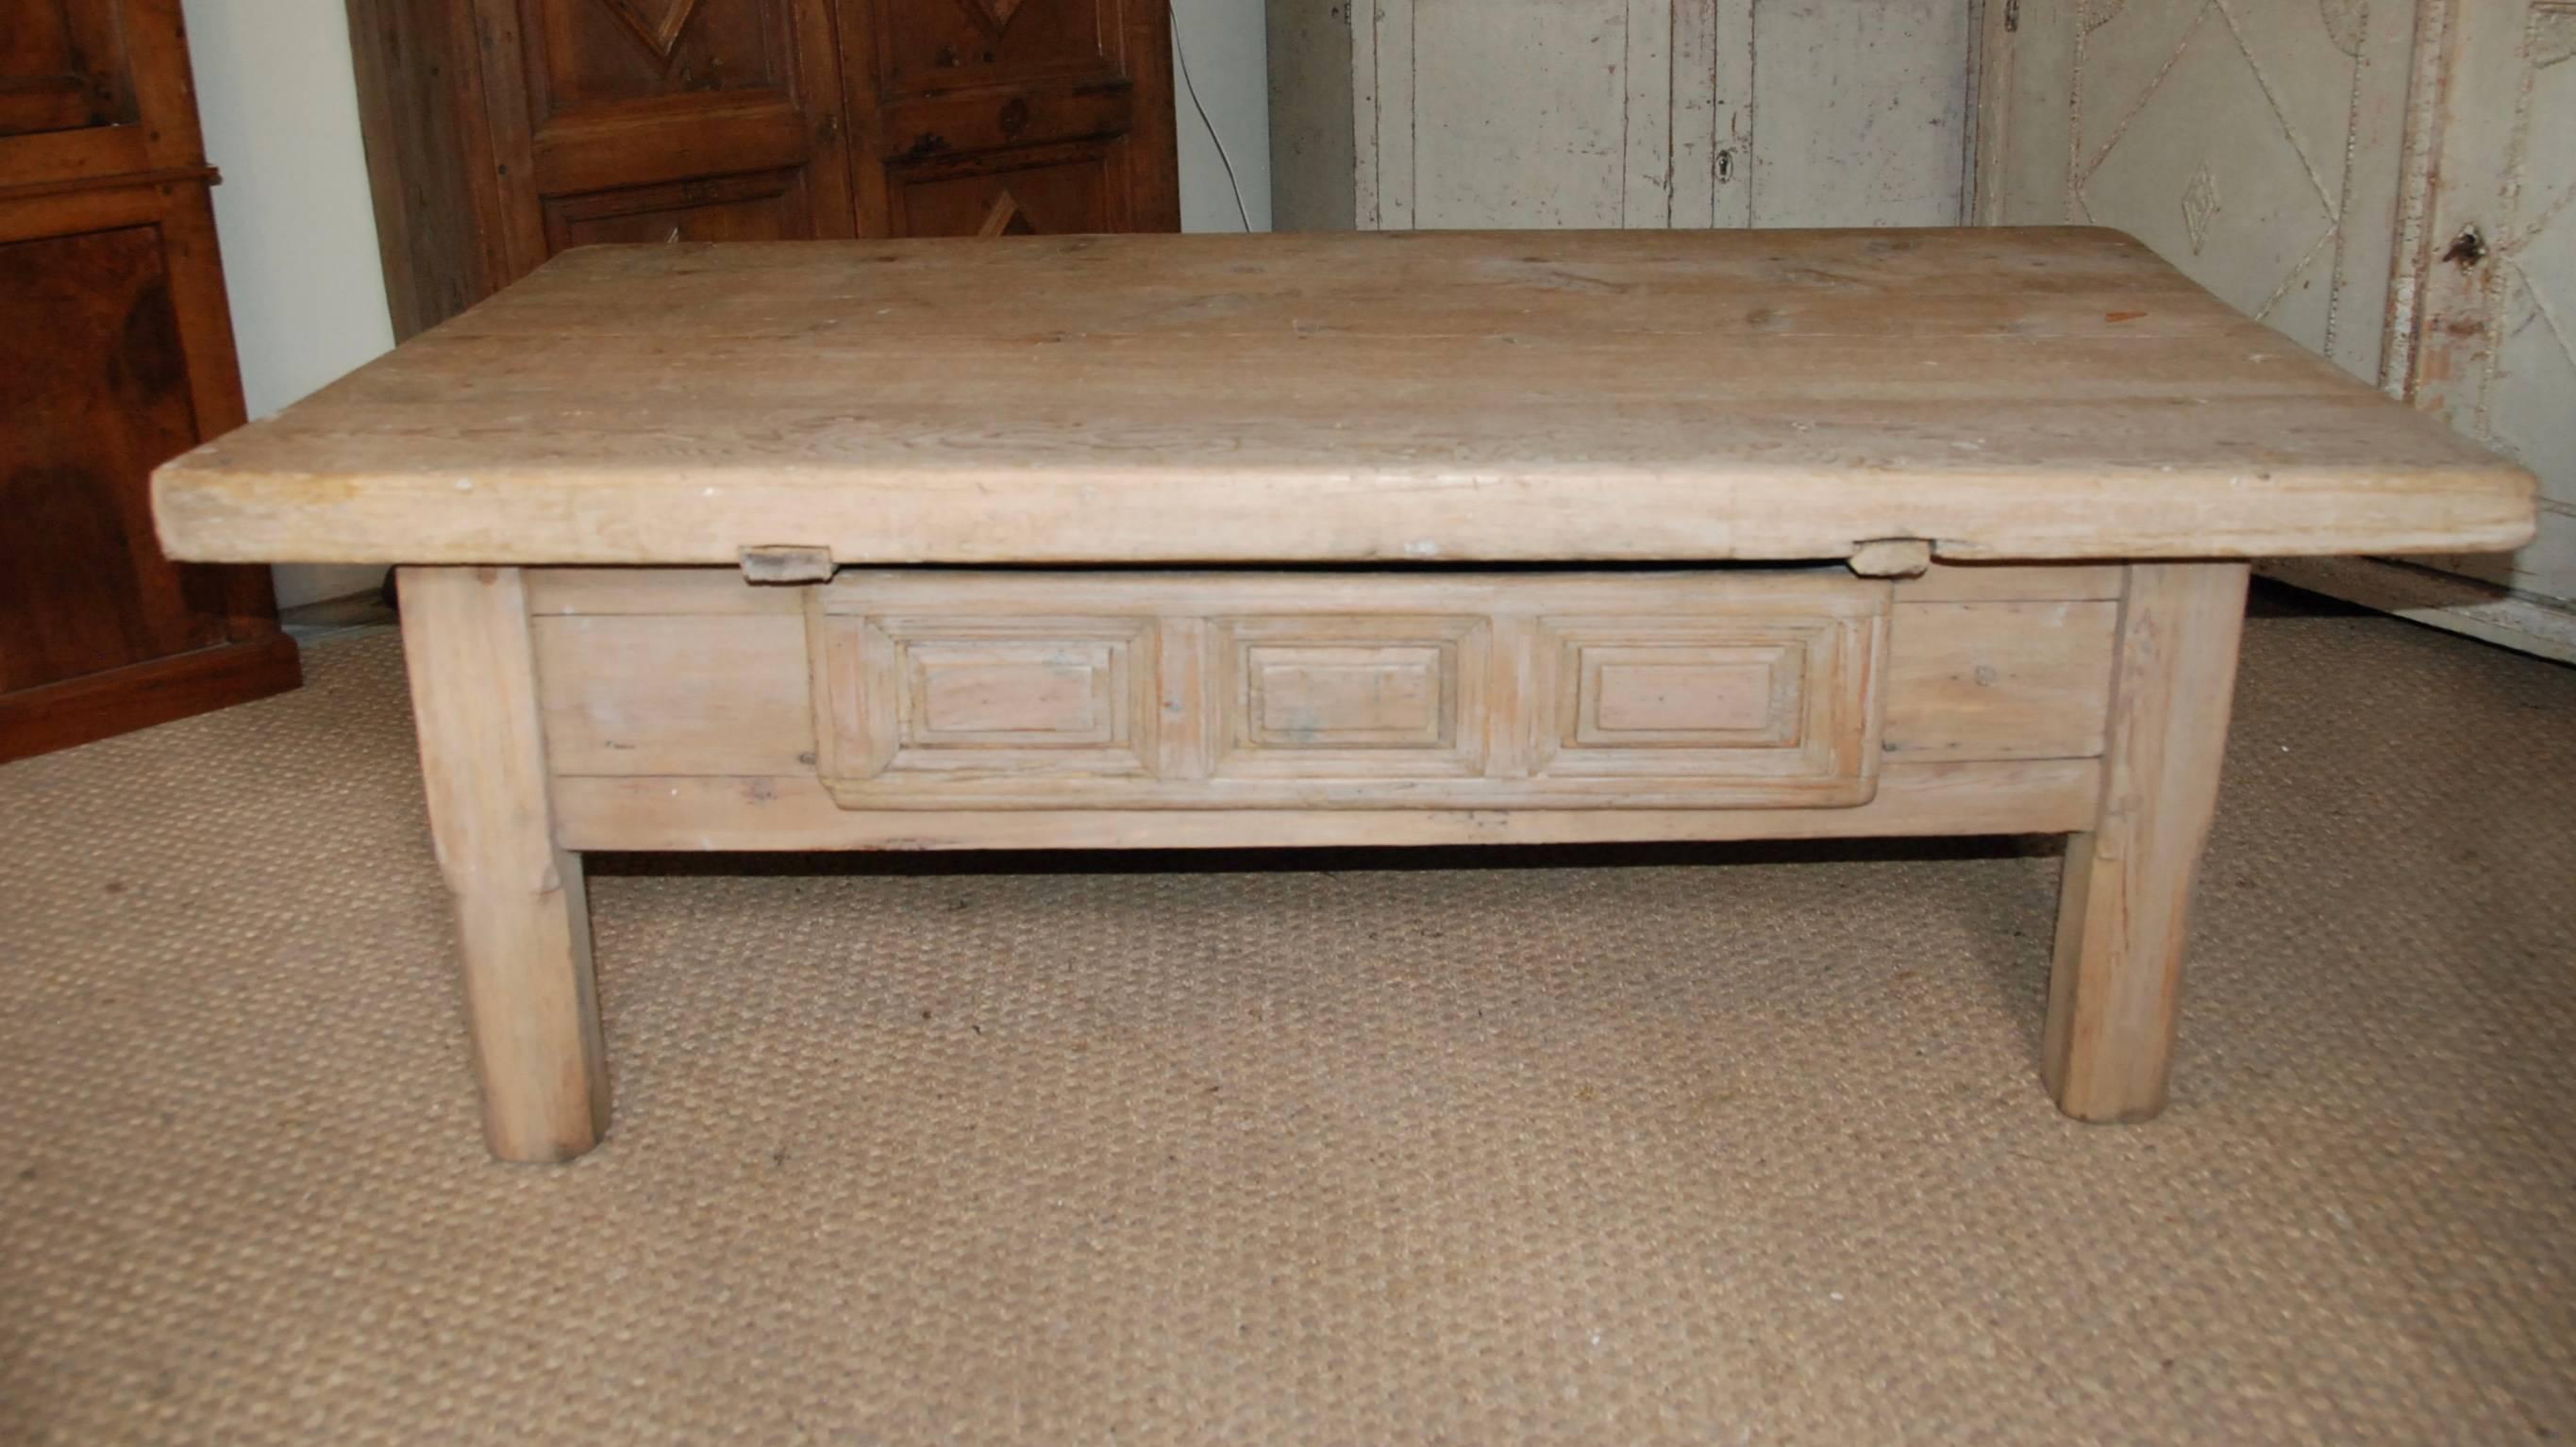 18th century Swedish pine farm table cut down to make a lovely coffee table. One large carved paneled drawer on front side. Beautiful thick single plank top. Great aged patina.